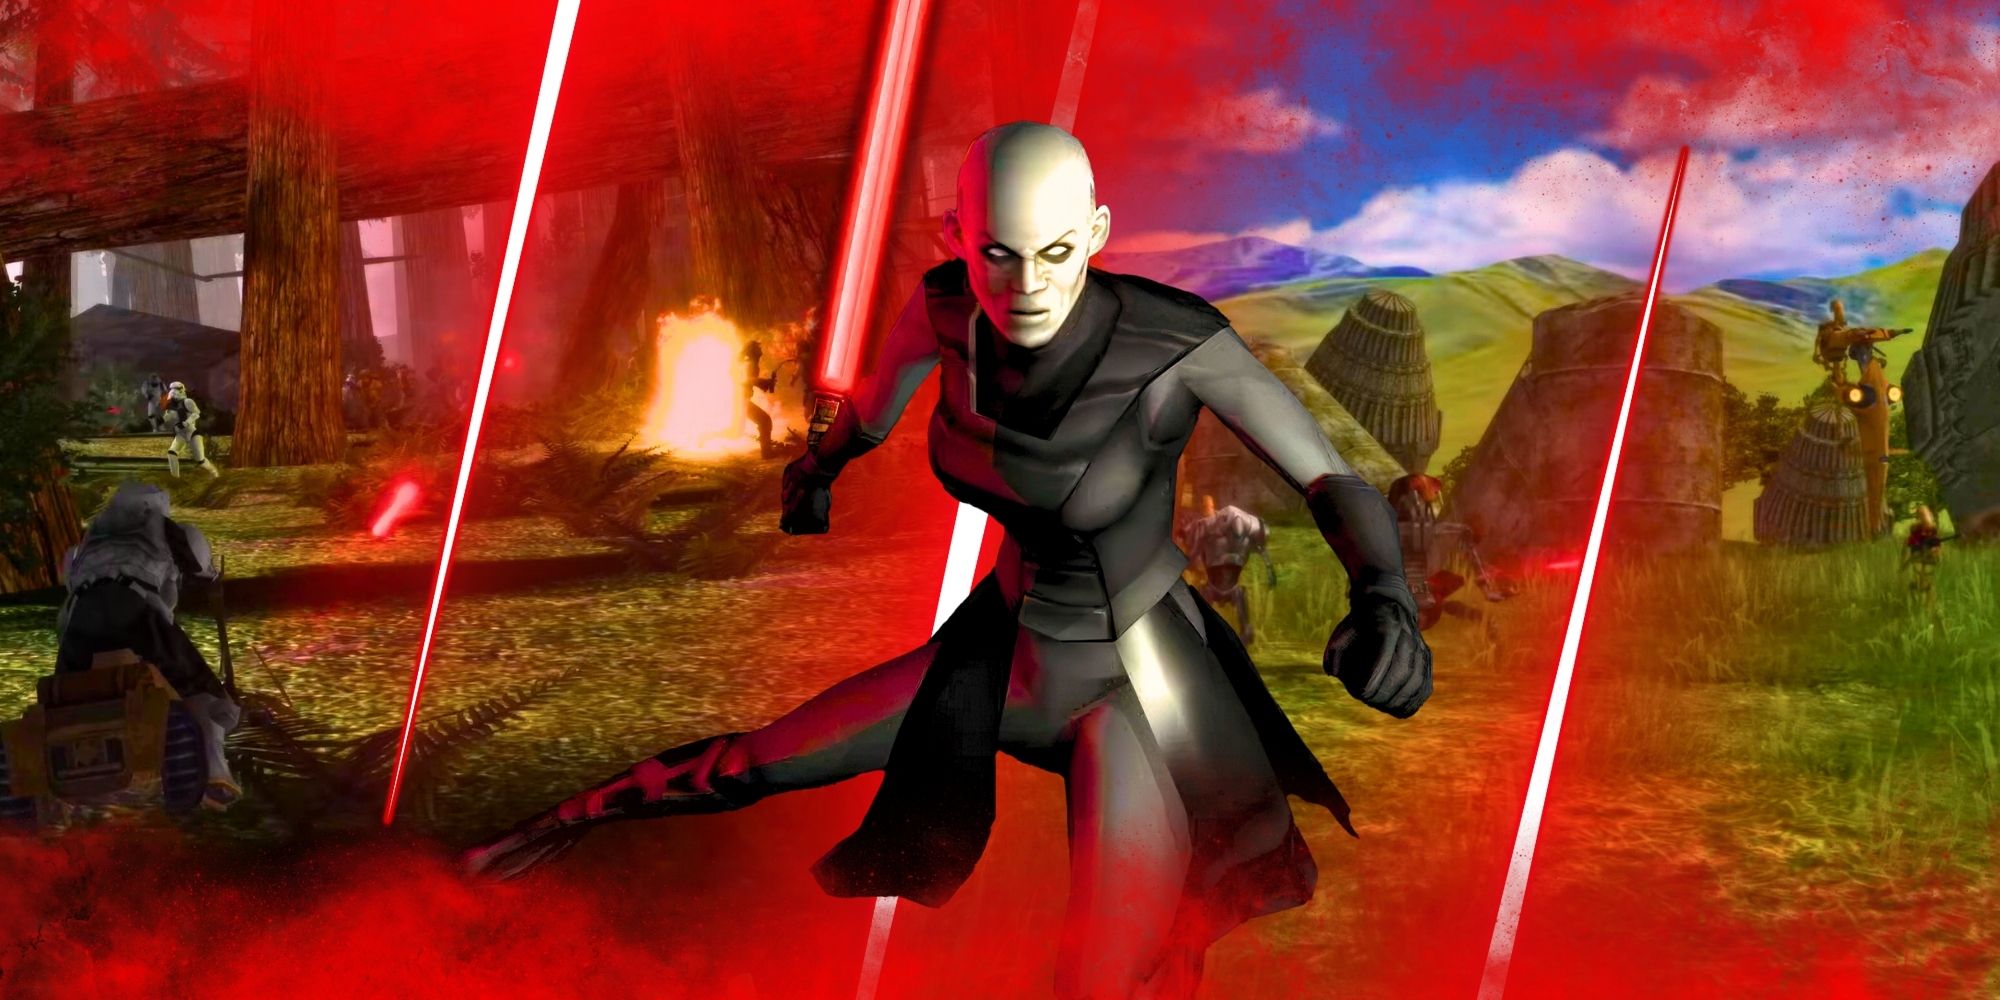 Asajj Ventress from this Battlefront Collection